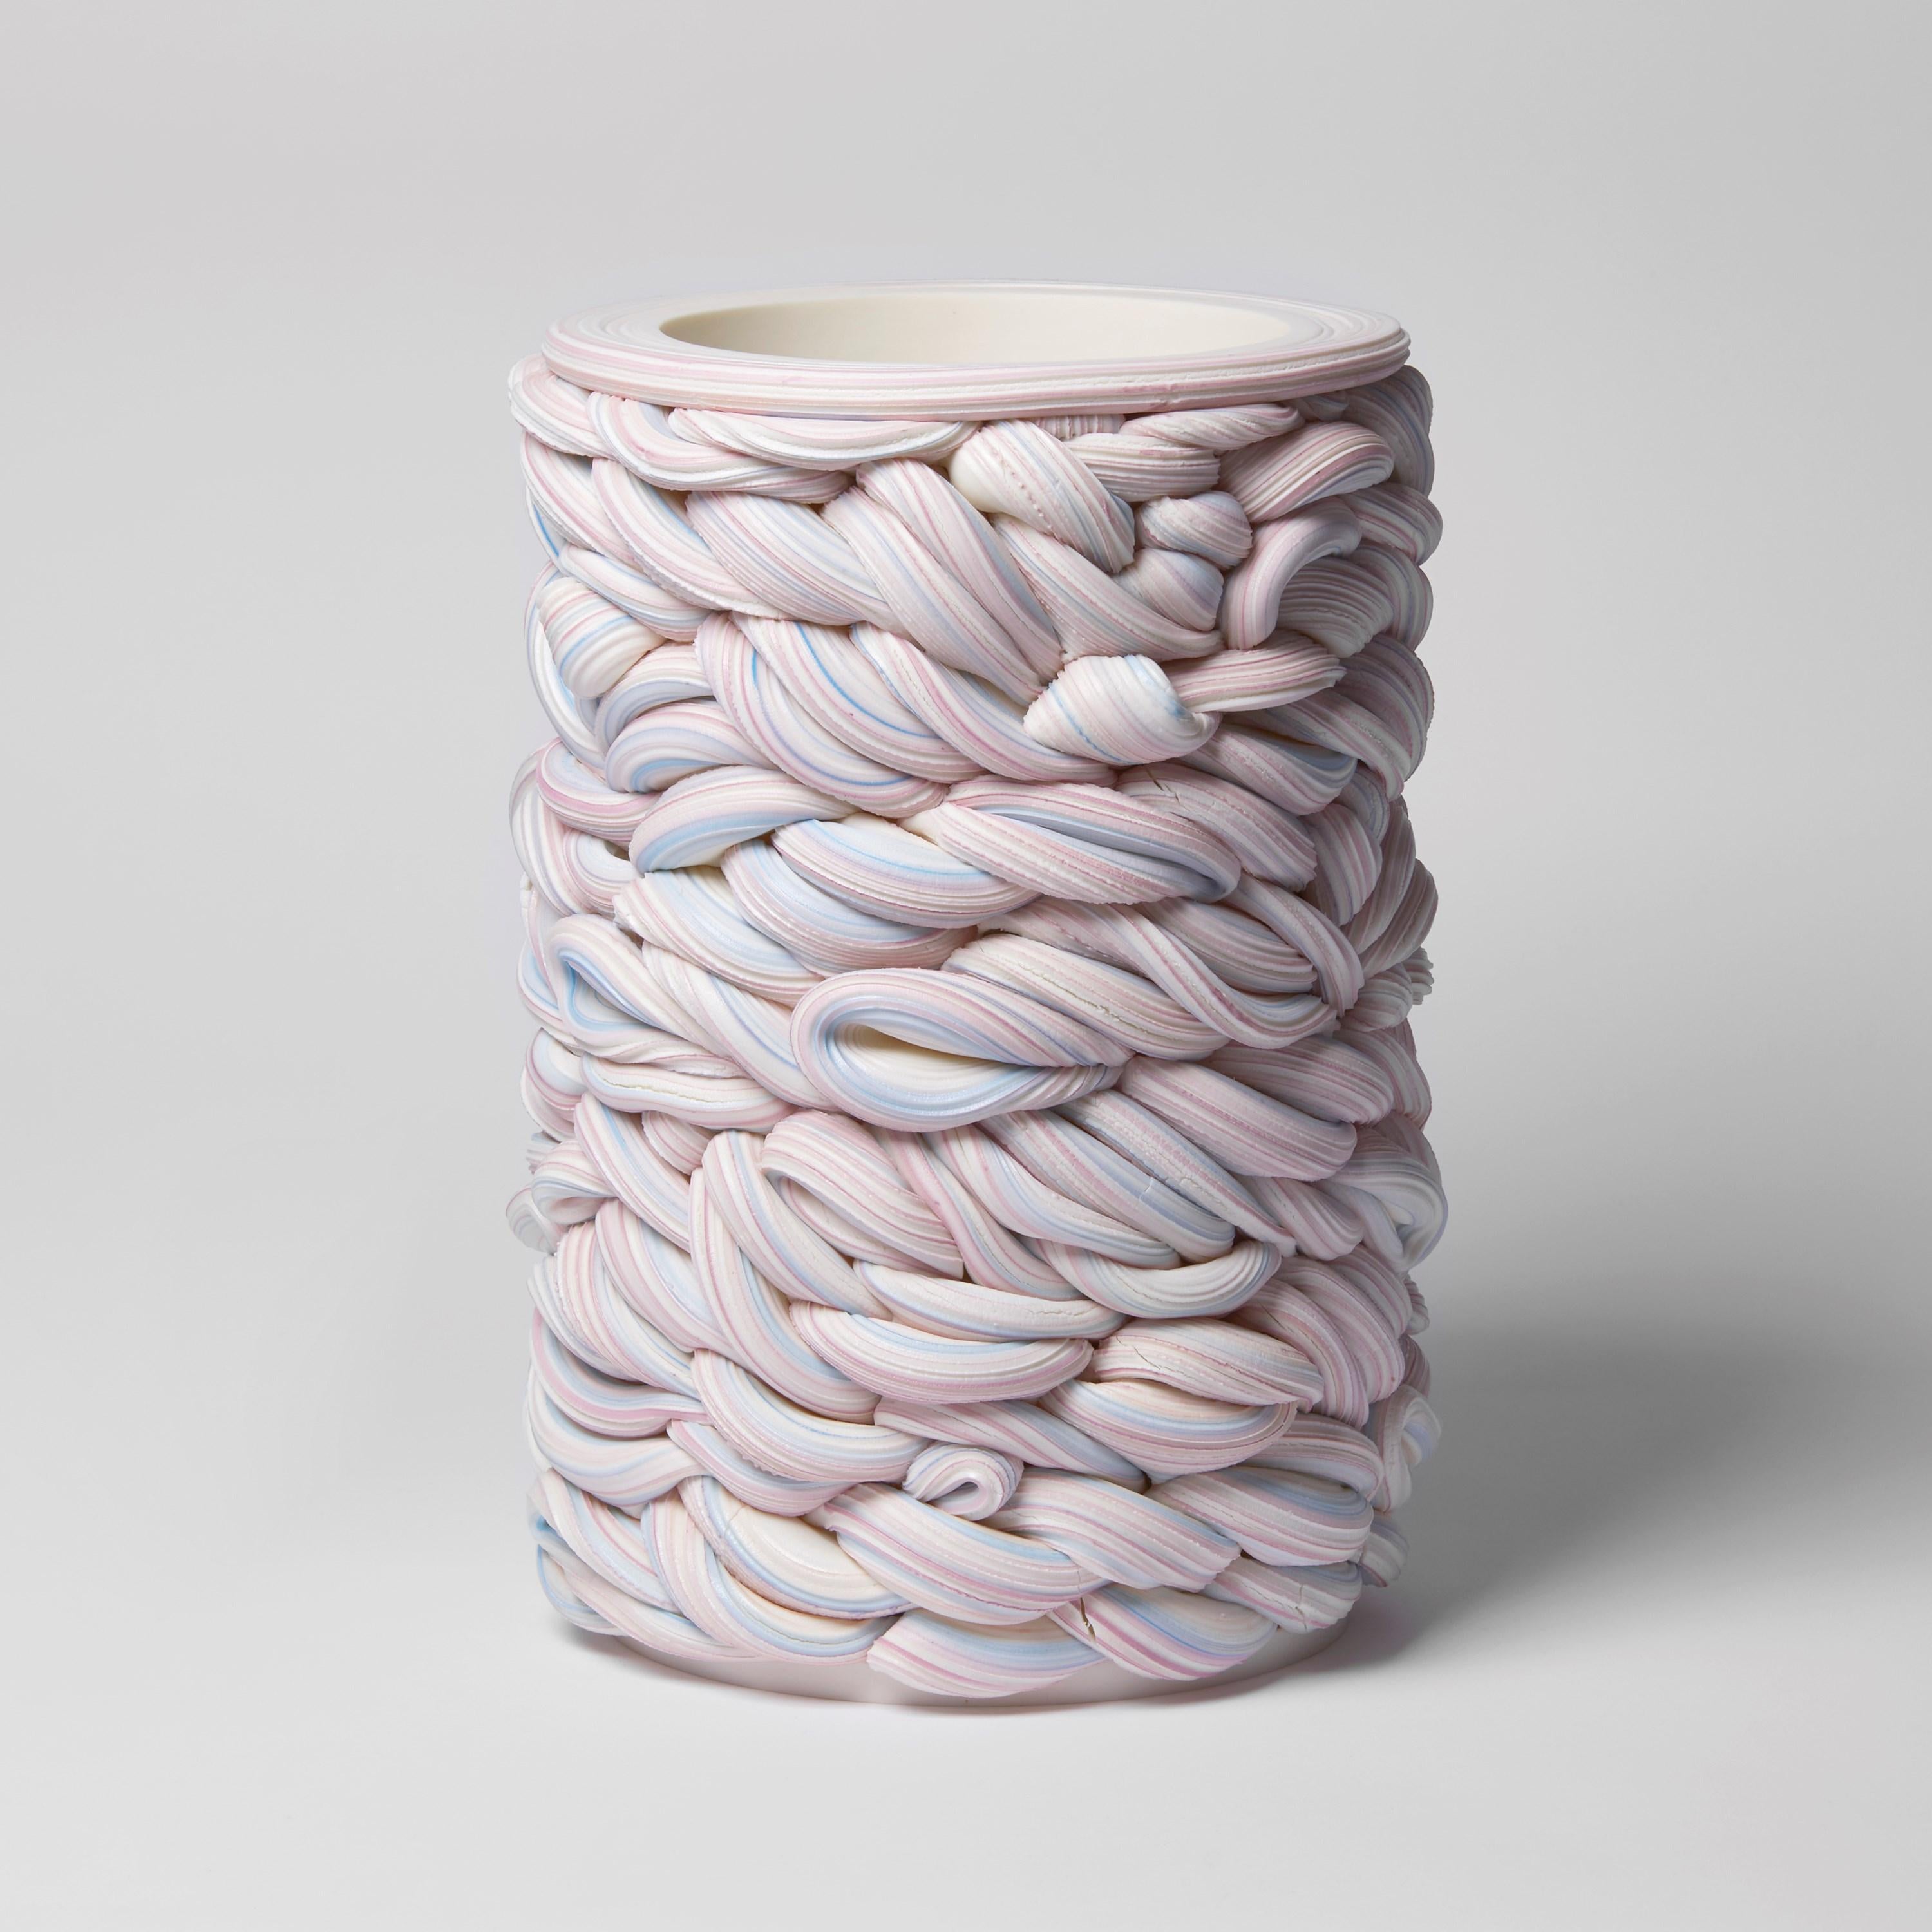 Banded Fold I is a unique sculpture by the British artist Steven Edwards, created from white and coloured parian porcelain.

Steven Edwards is a ceramic artist whose work investigates the language of making through the materiality and physicality